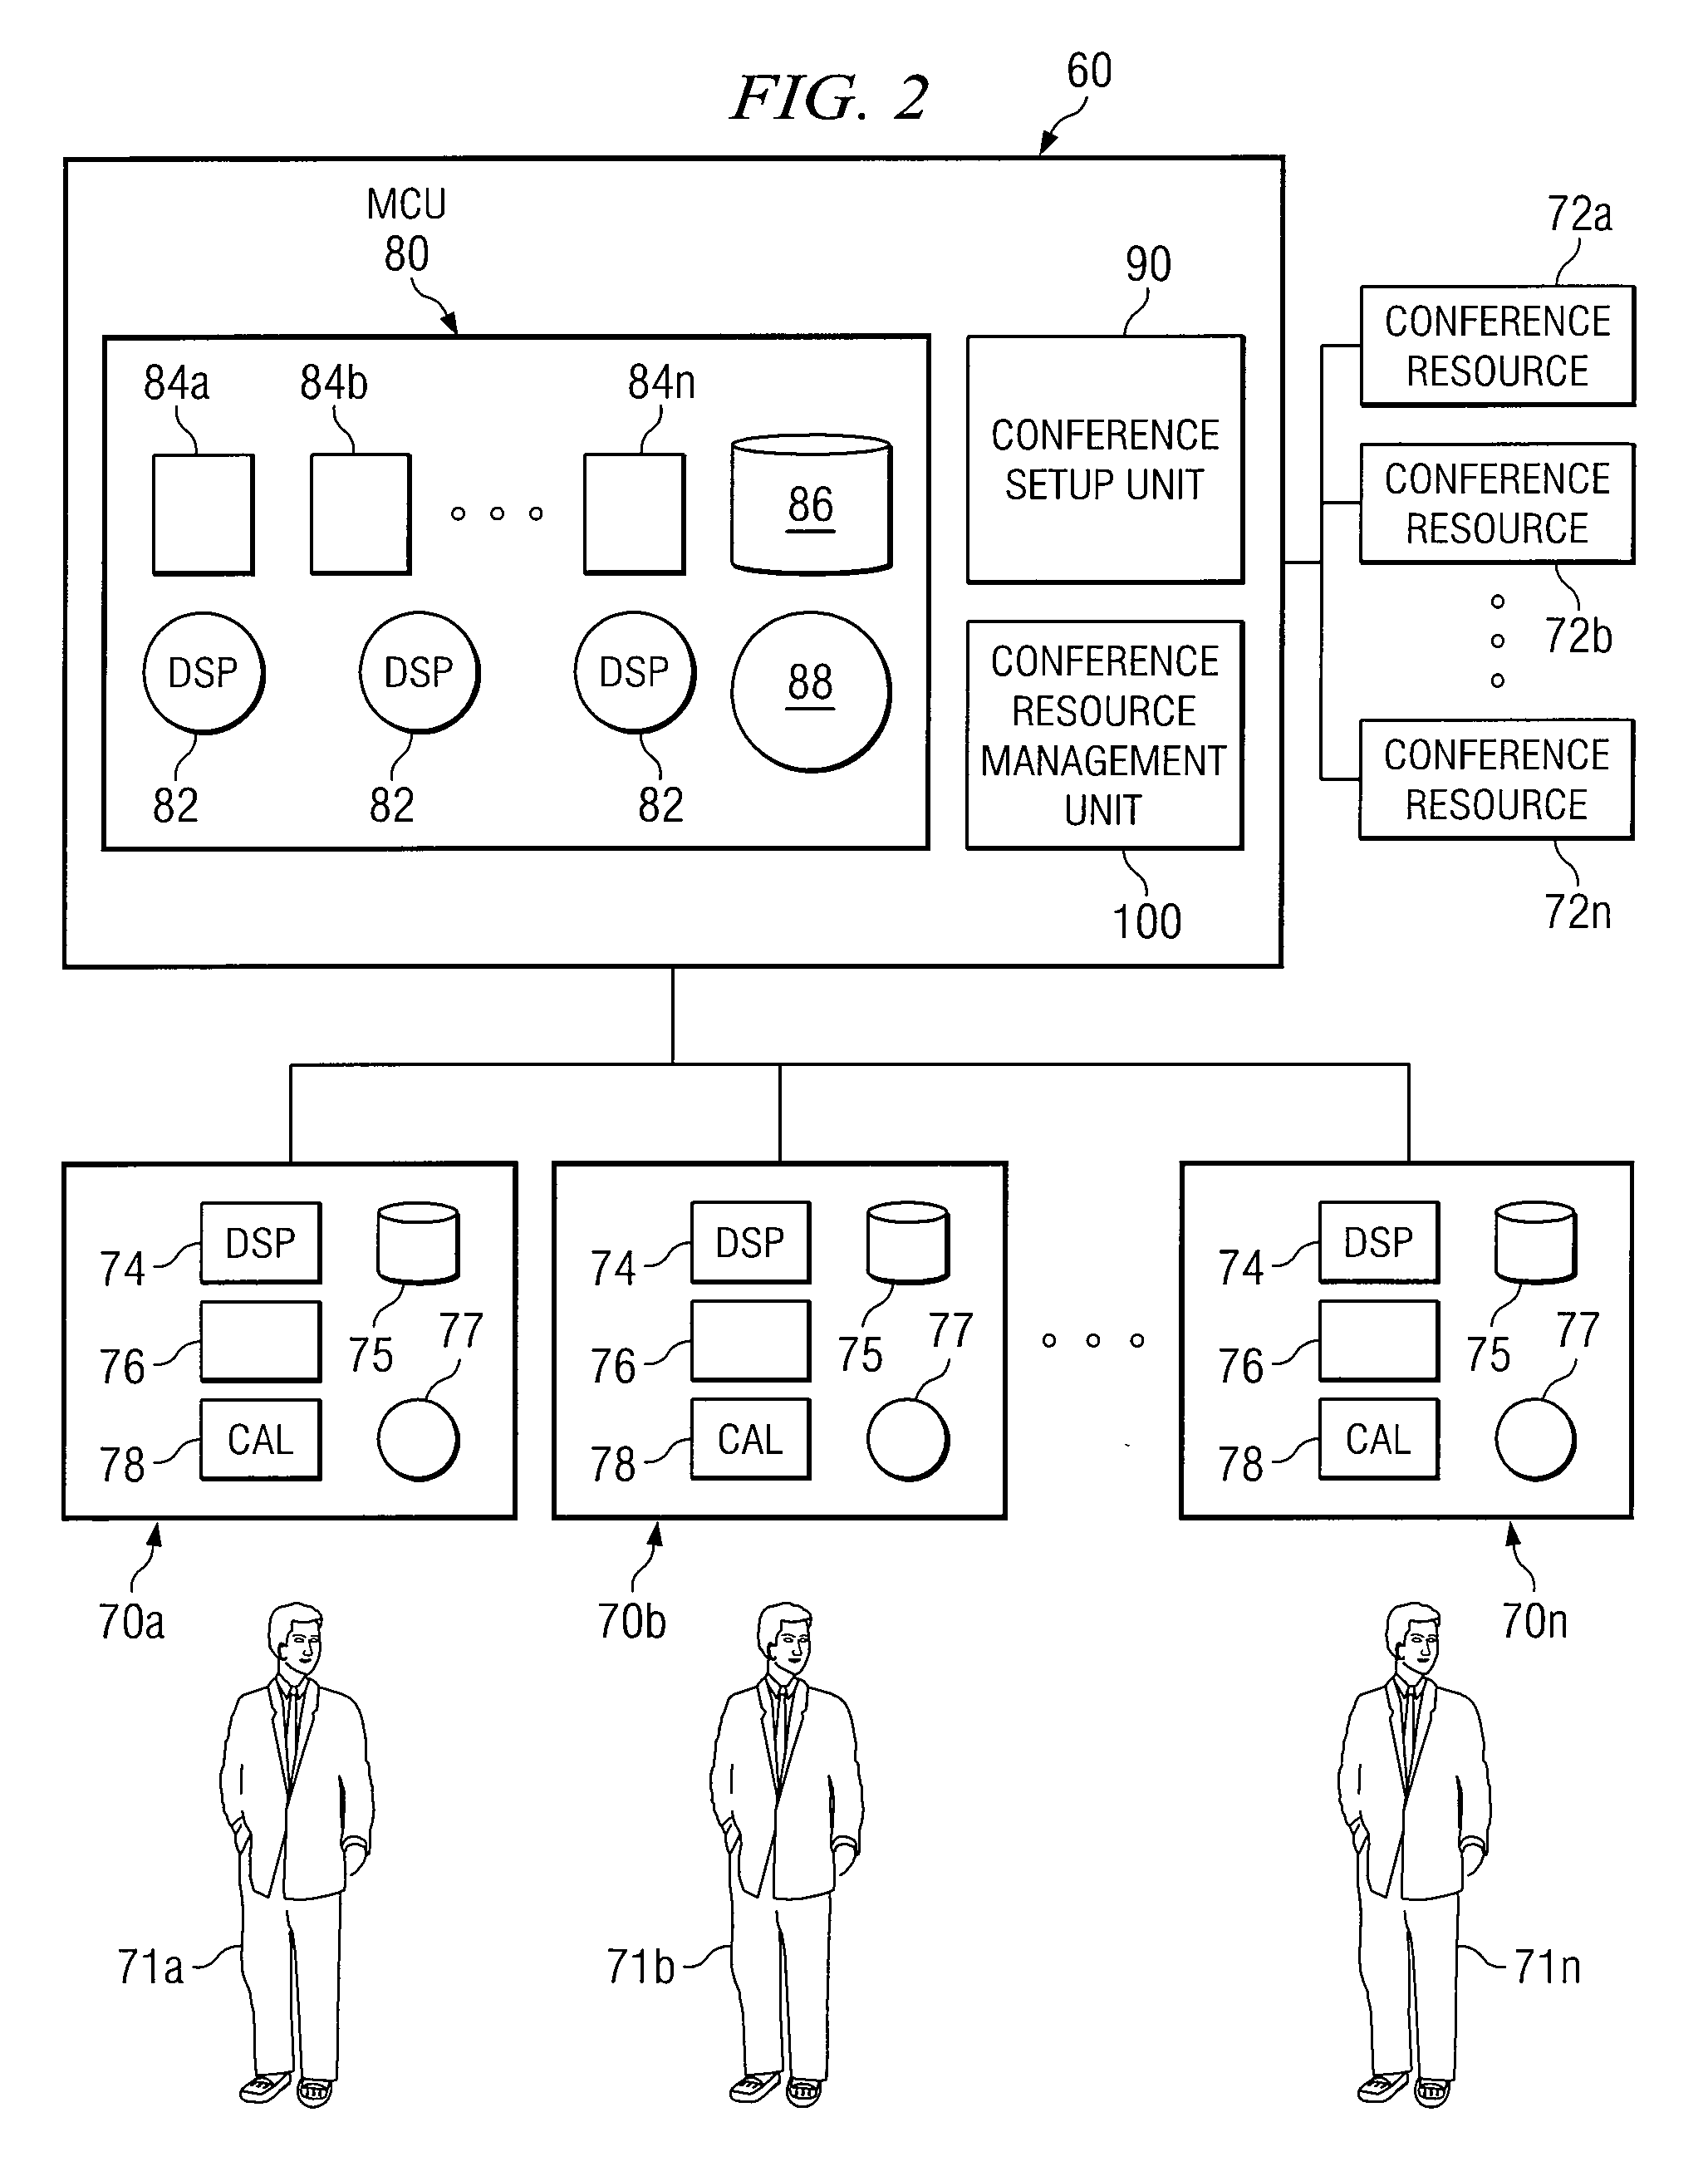 Method and system for the automatic configuration of conference resources